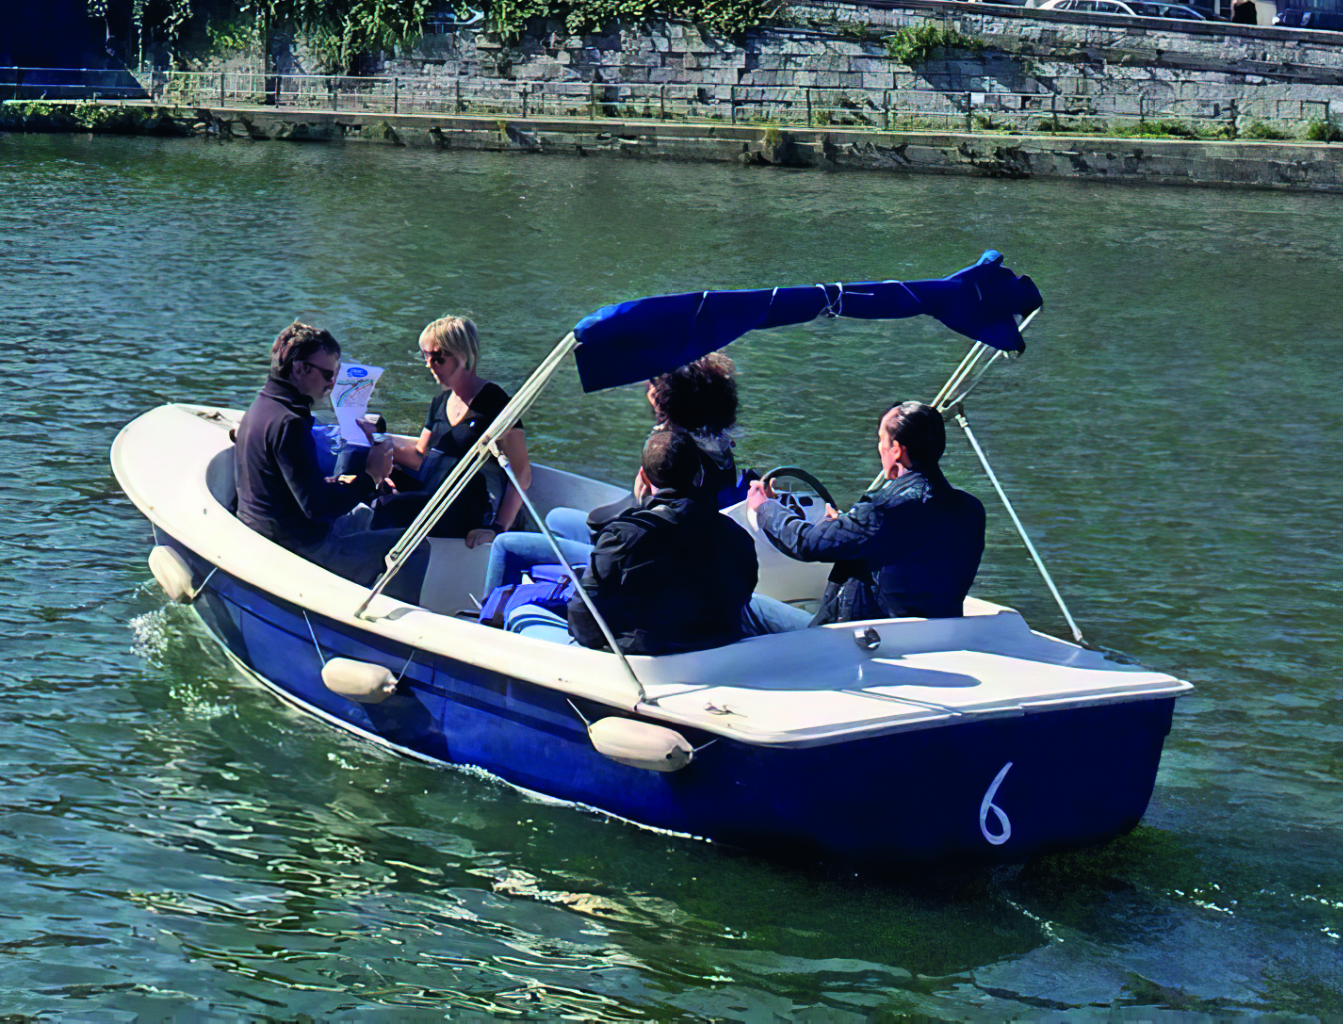 Cruise with colleagues on an electric boat (no license required) in Dinant